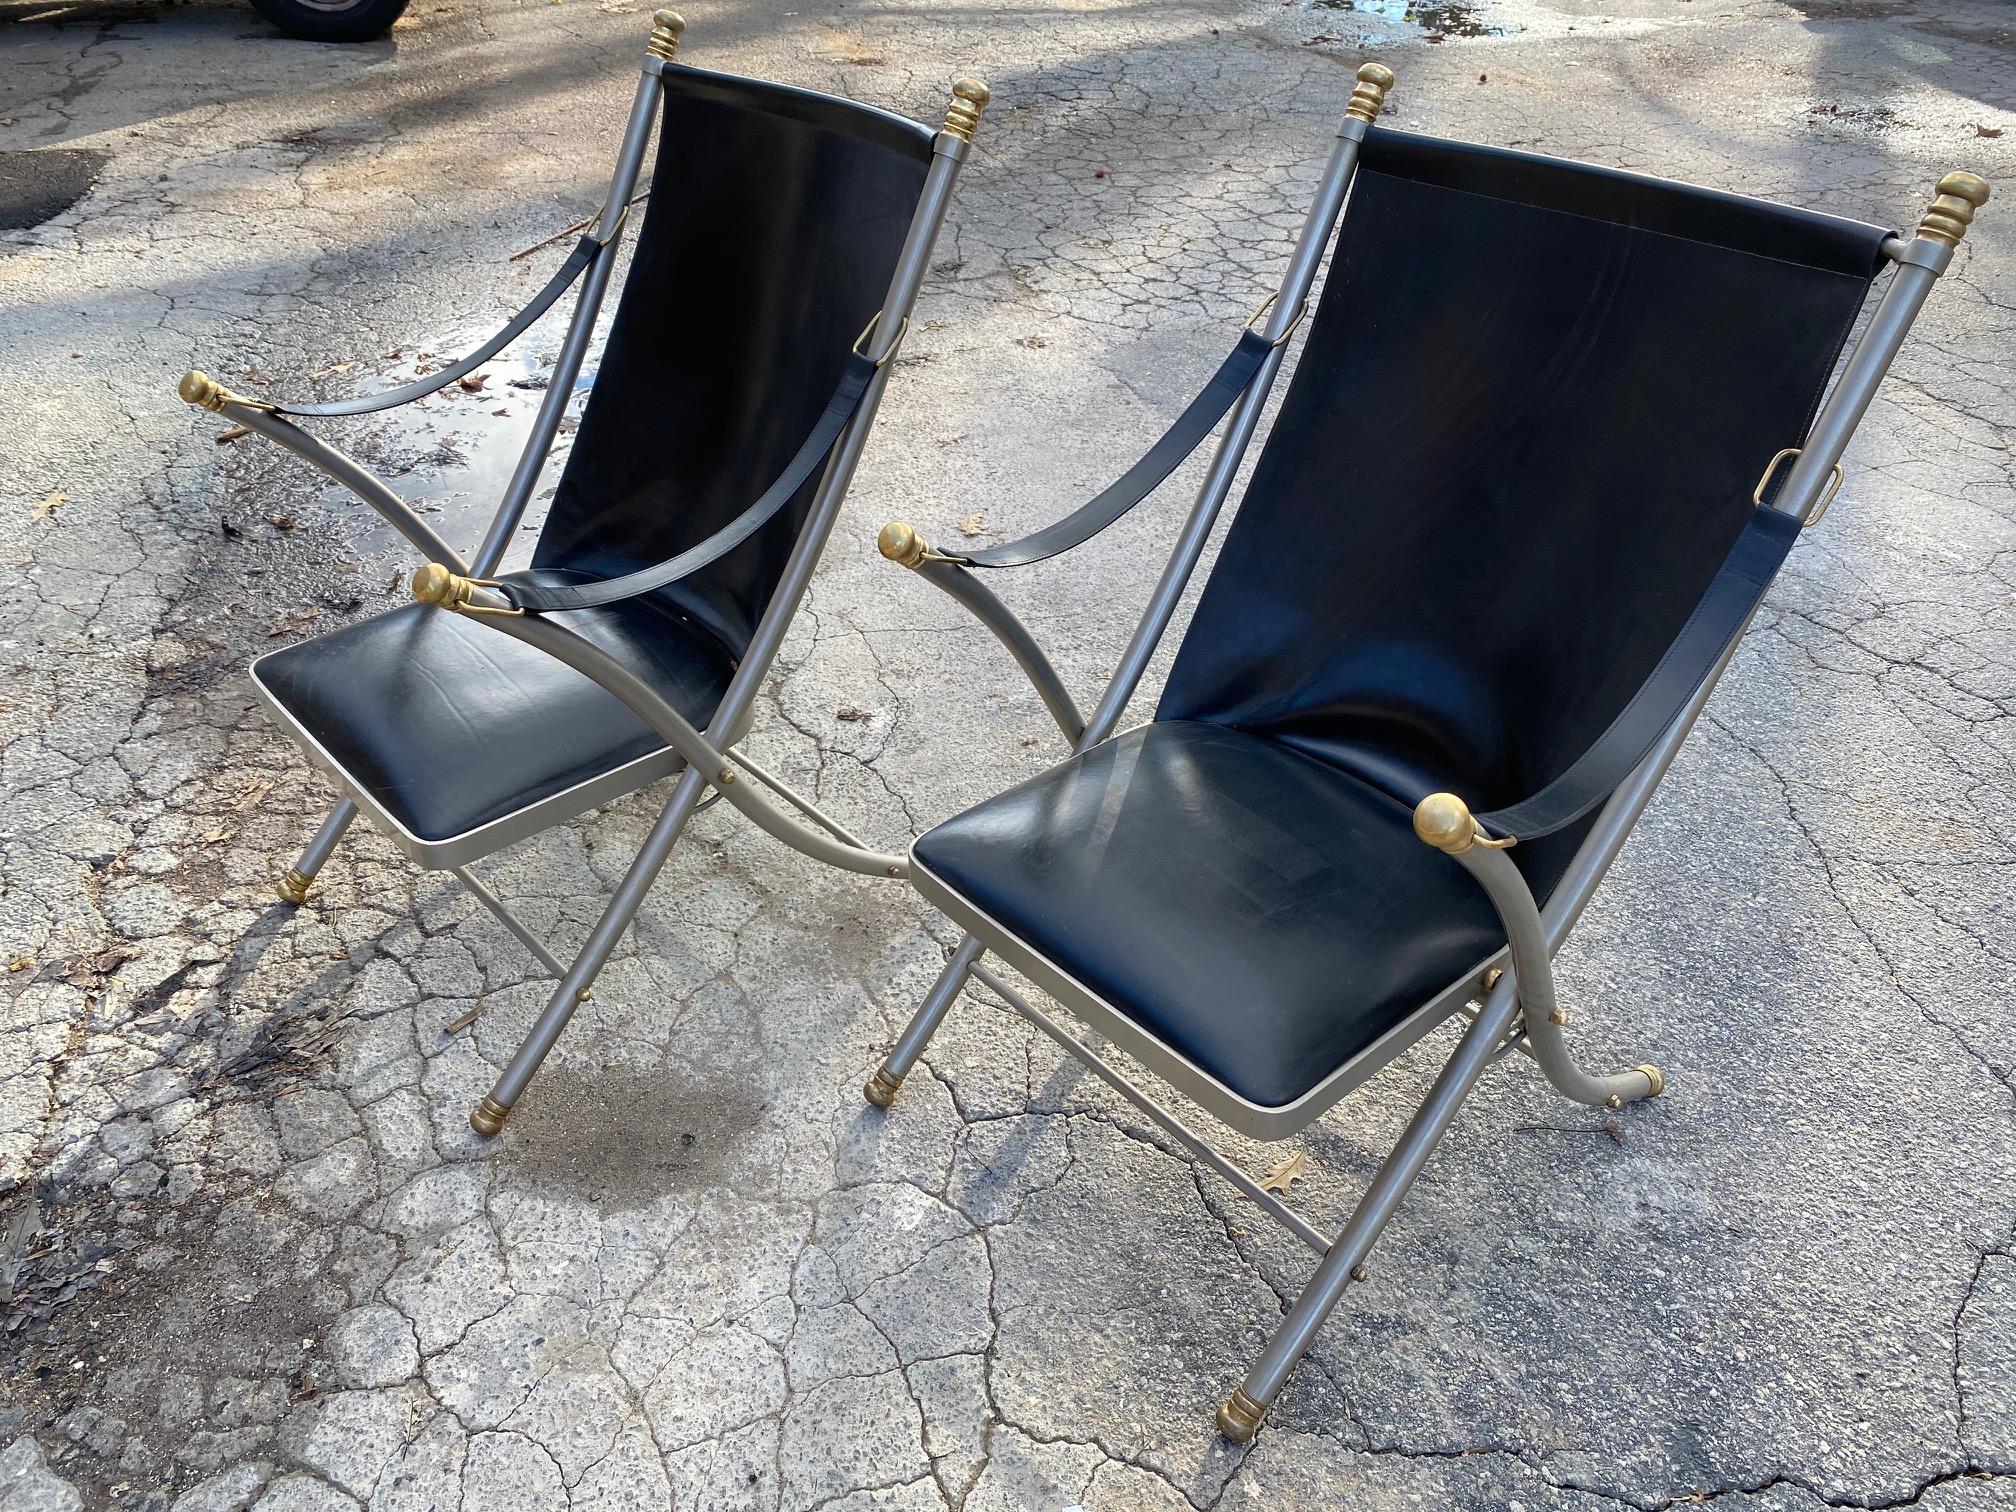 Lovely pair of Maison Jansen style midcentury chairs made of steel and brass upholstered in black leather. These fine looking chairs are transitional and would work well in a variety of decors.